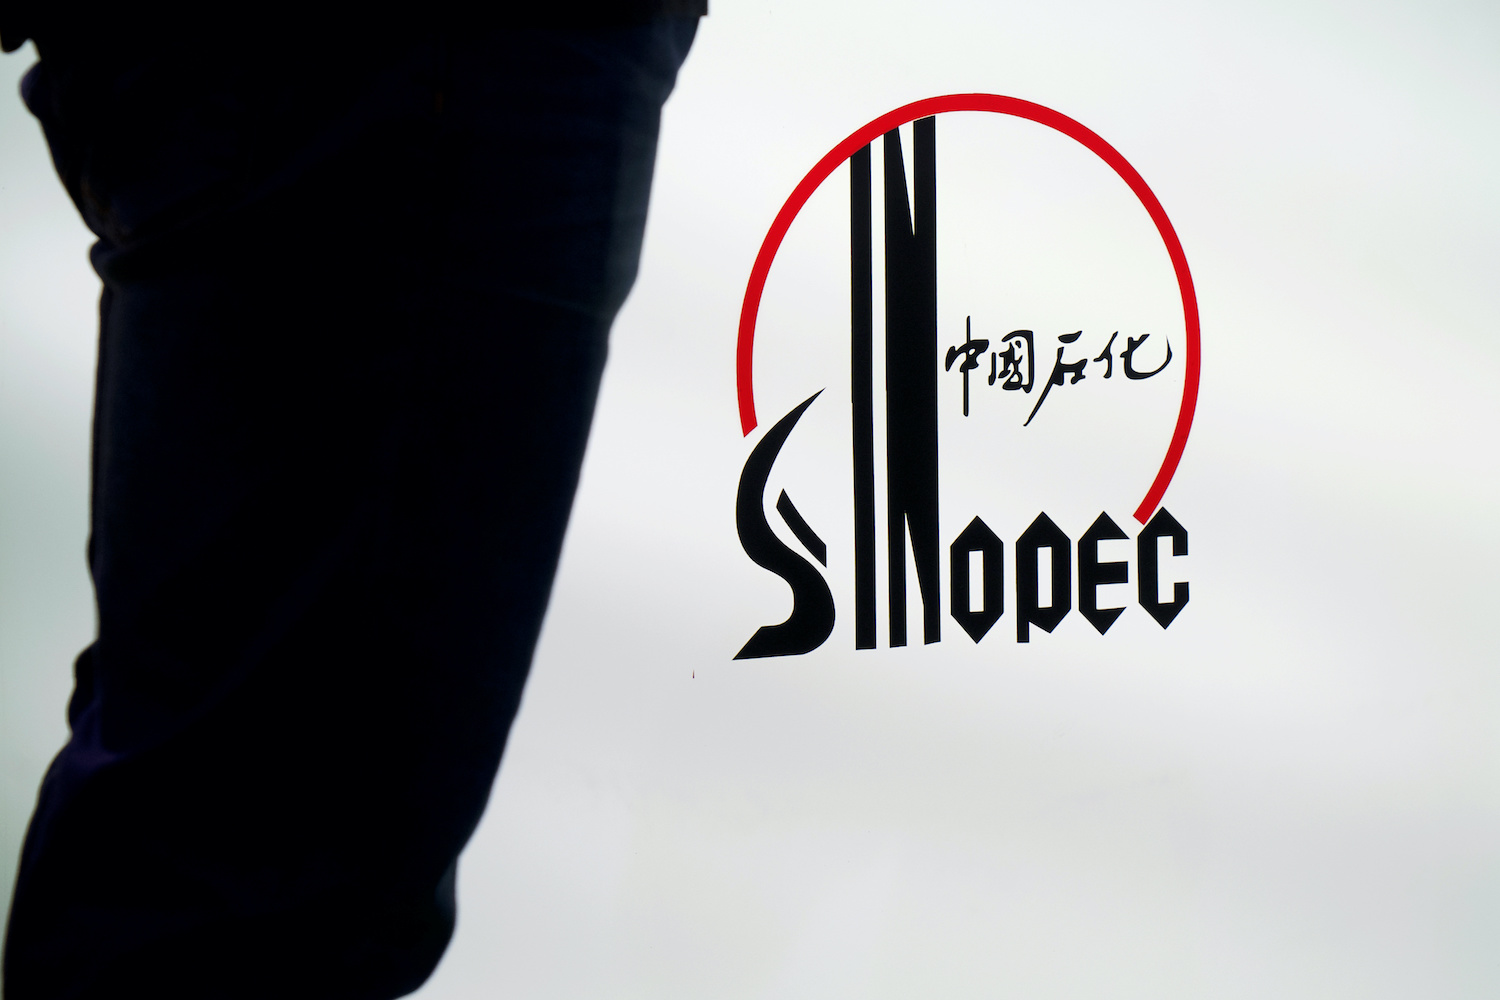 Sinopec Plans to Spend $4.6 Billion on Hydrogen Energy by 2025